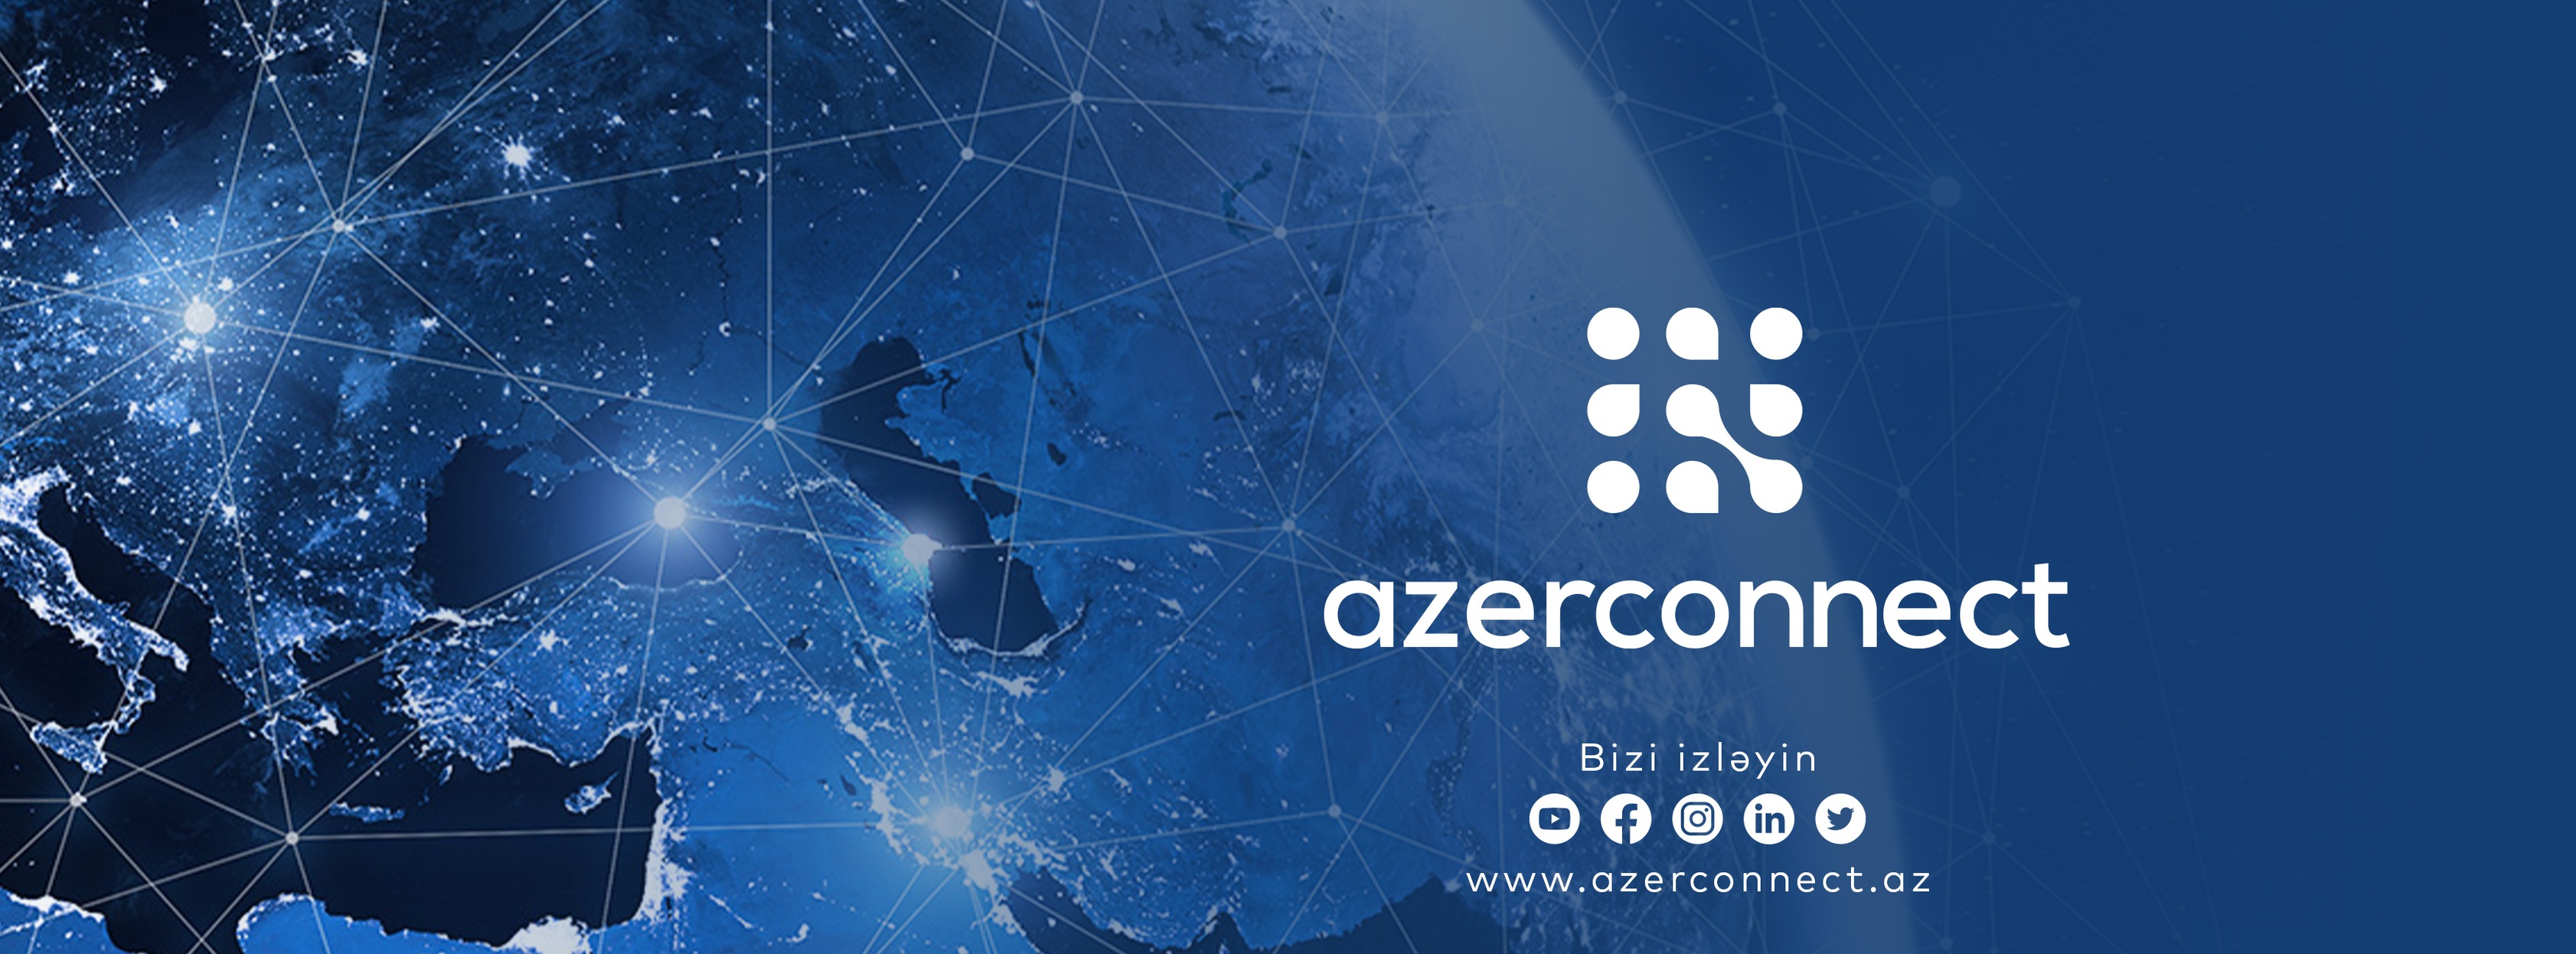 Azerconnect Group